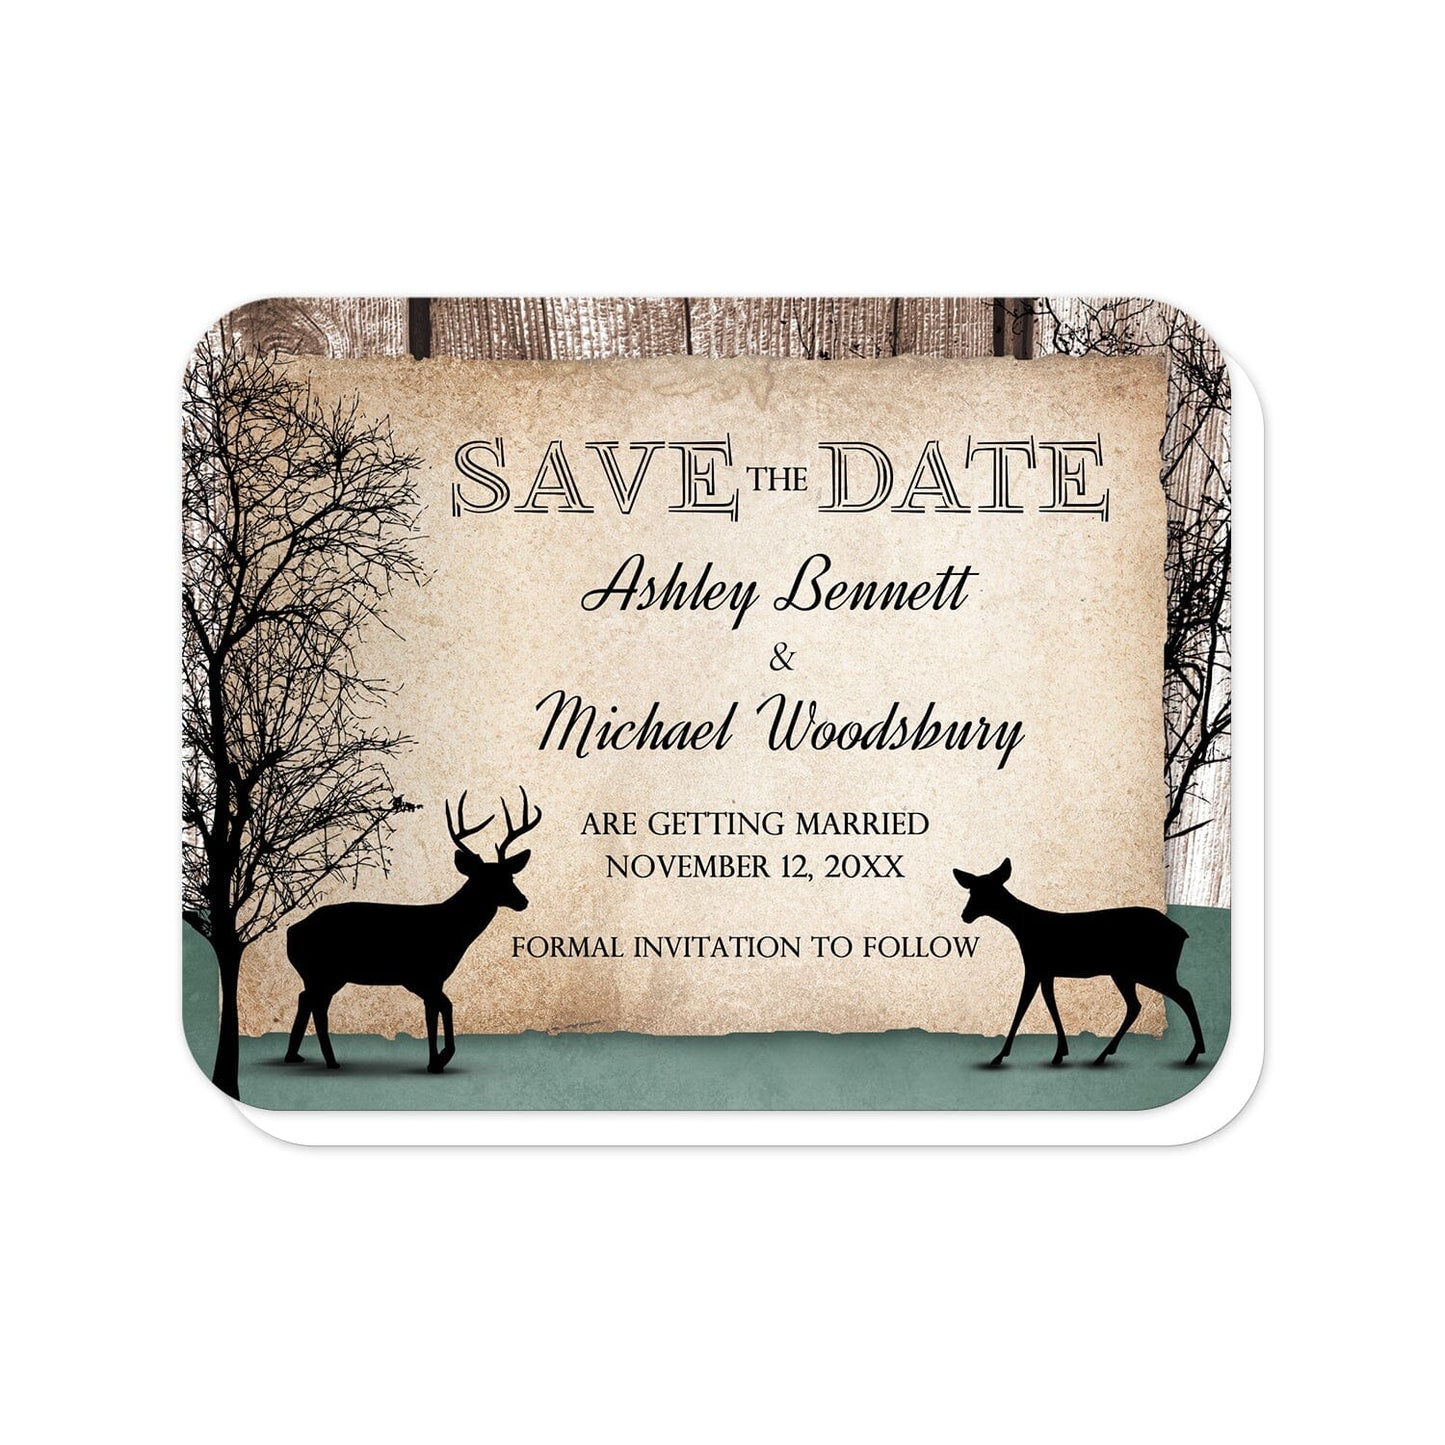 Rustic Woodsy Deer Save the Date Cards (with rounded corners) at Artistically Invited. Rustic woodsy deer save the date cards designed with silhouettes of a buck deer with antlers, a doe, and winter trees over a wood brown background and a faded hunter green design along the bottom. Your personalized wedding date details are custom printed in black over a tattered rustic paper illustration between the deer.